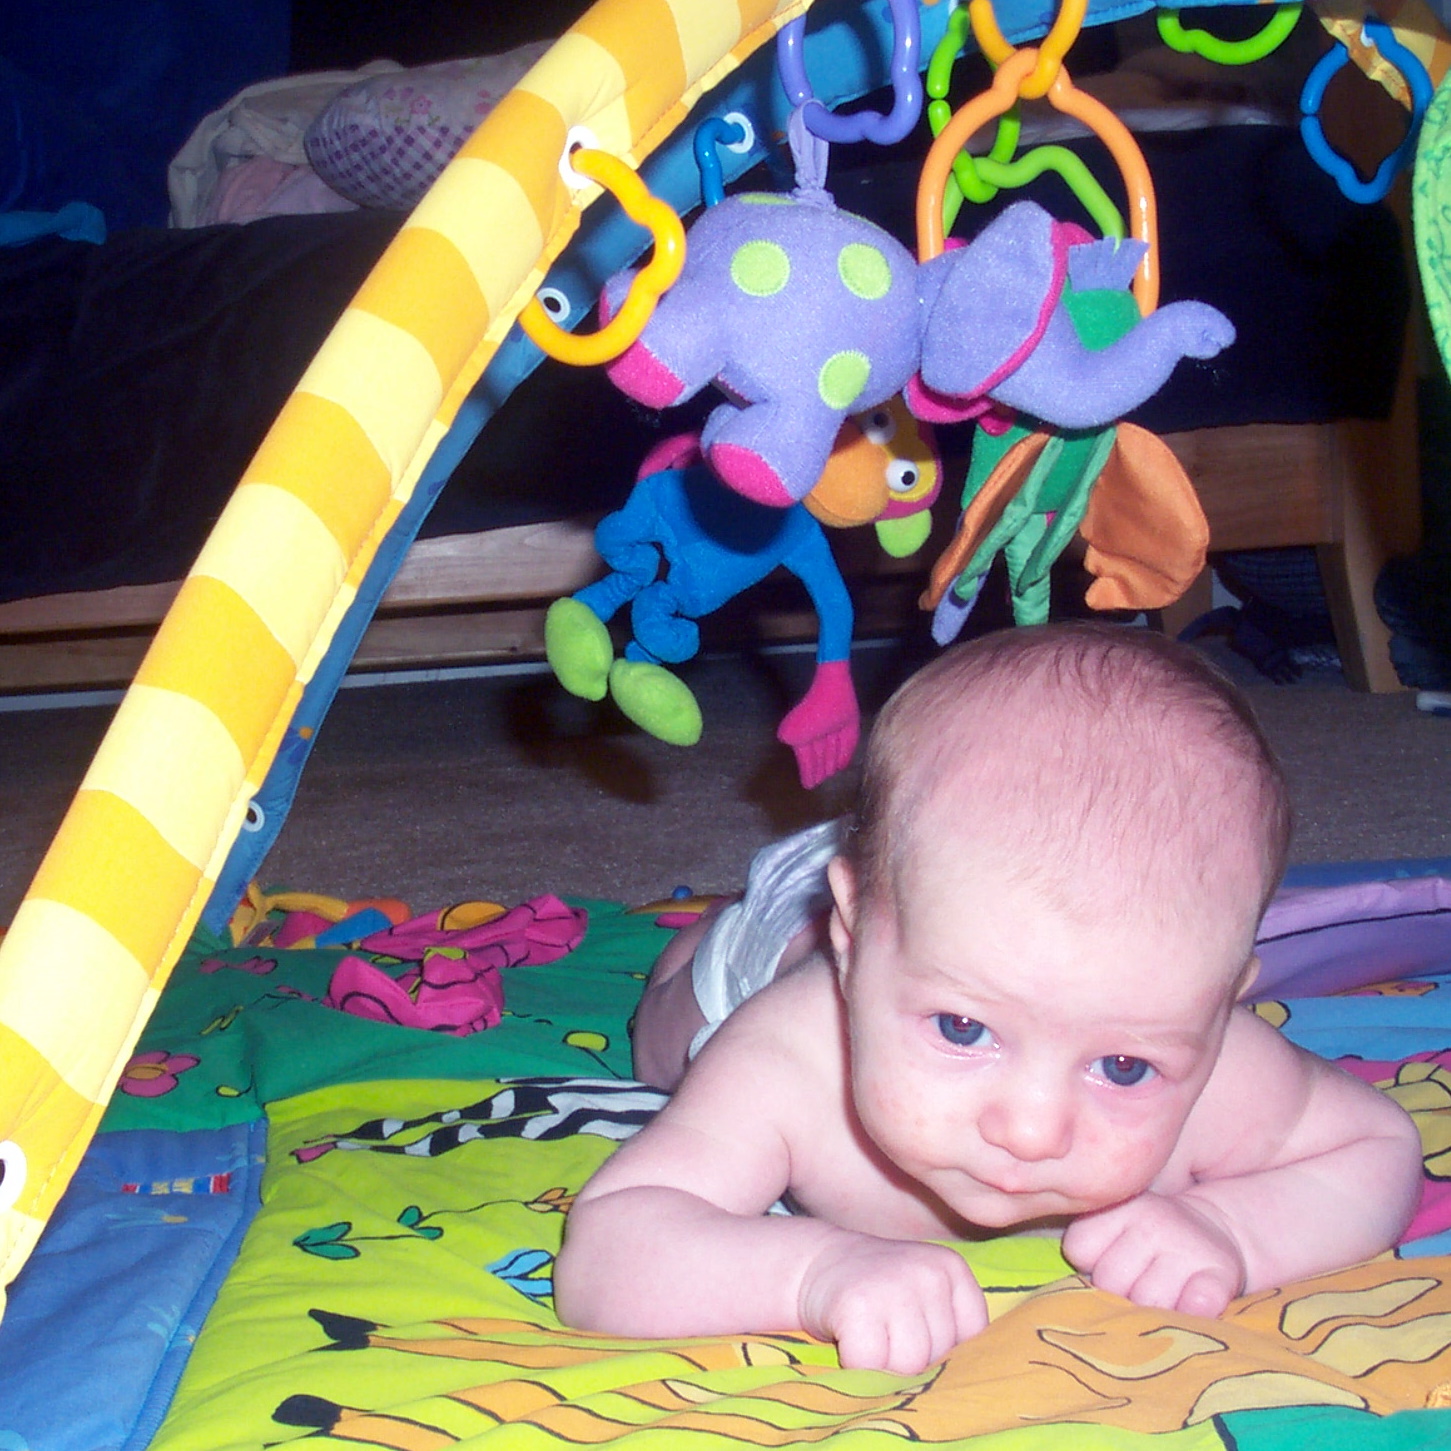 Second month: in a jungle gym, June 2005